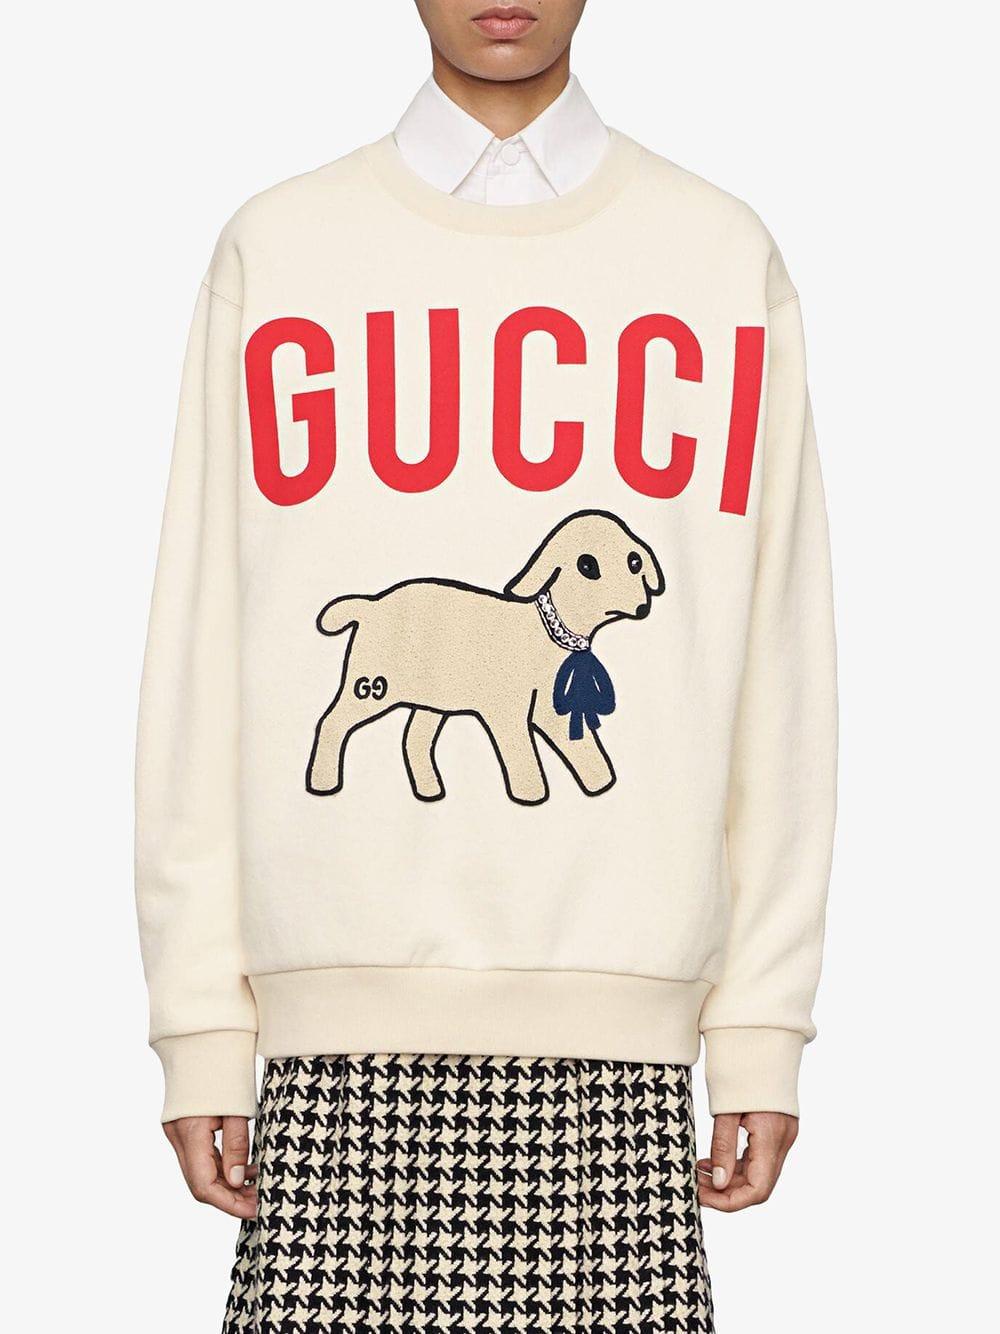 Gucci Lamb Patch Oversized Sweatshirt in White | Lyst